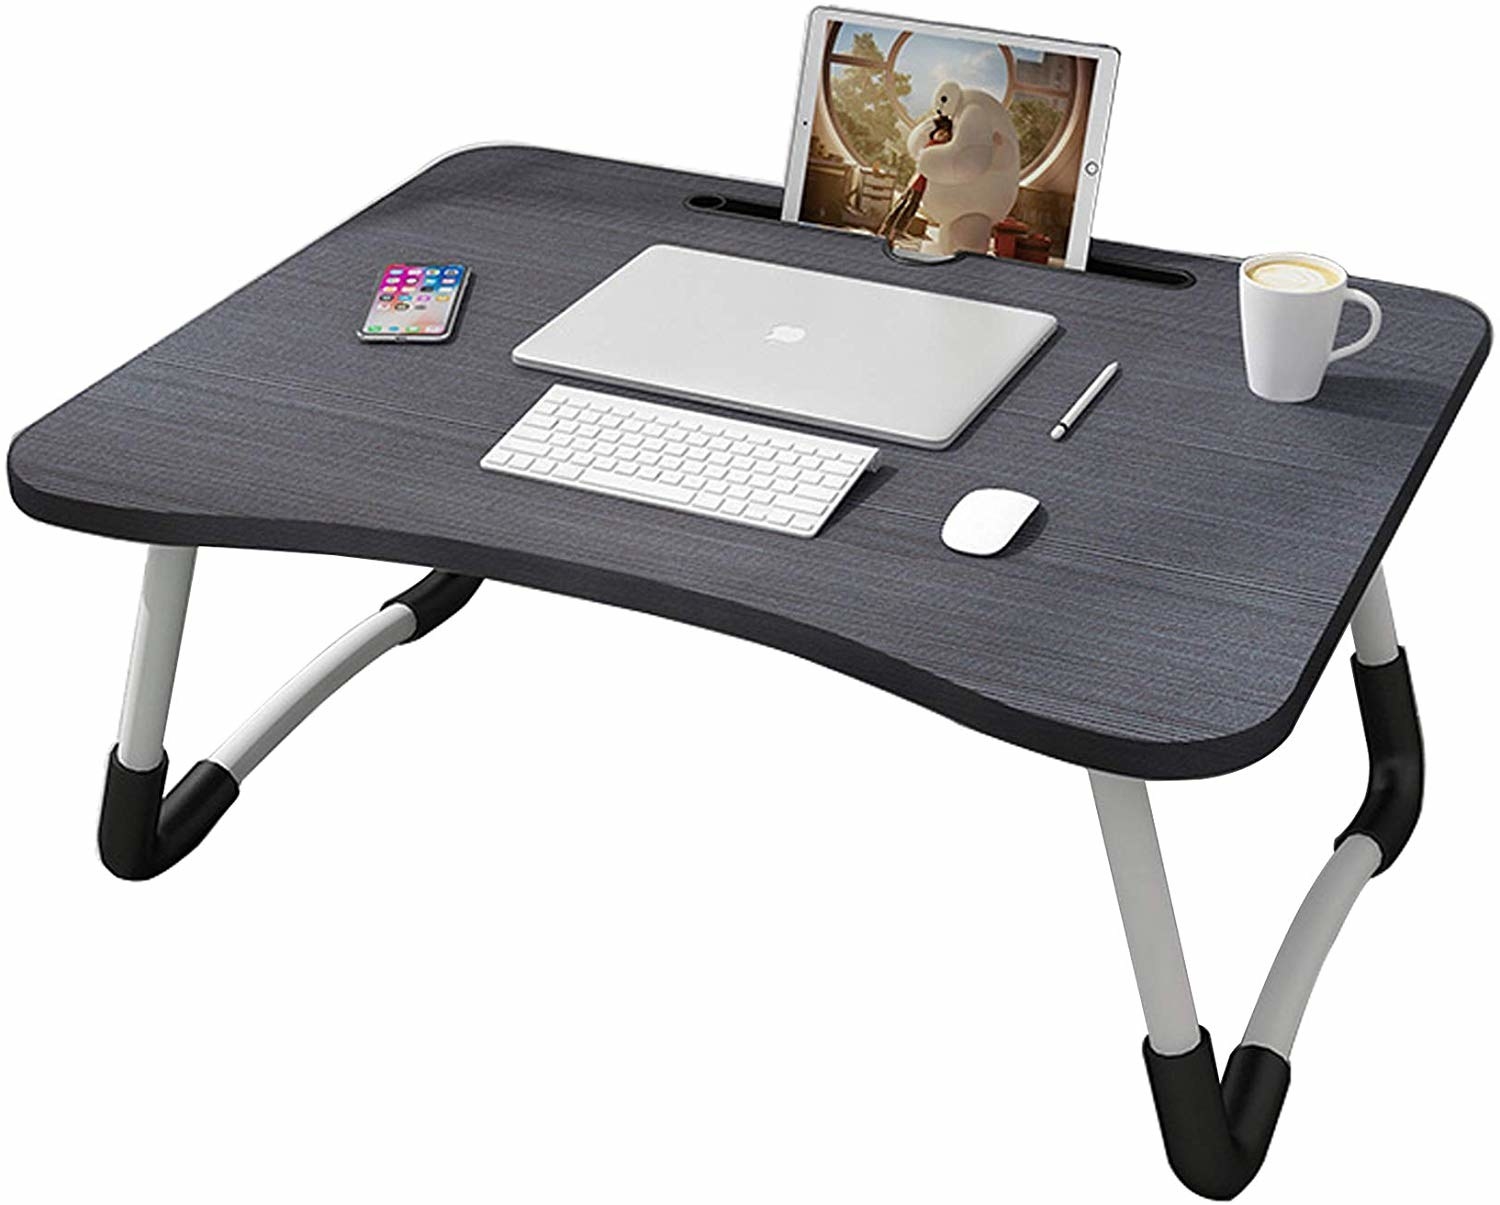 A foldable laptop table with multiple devices and a cup of coffee on it